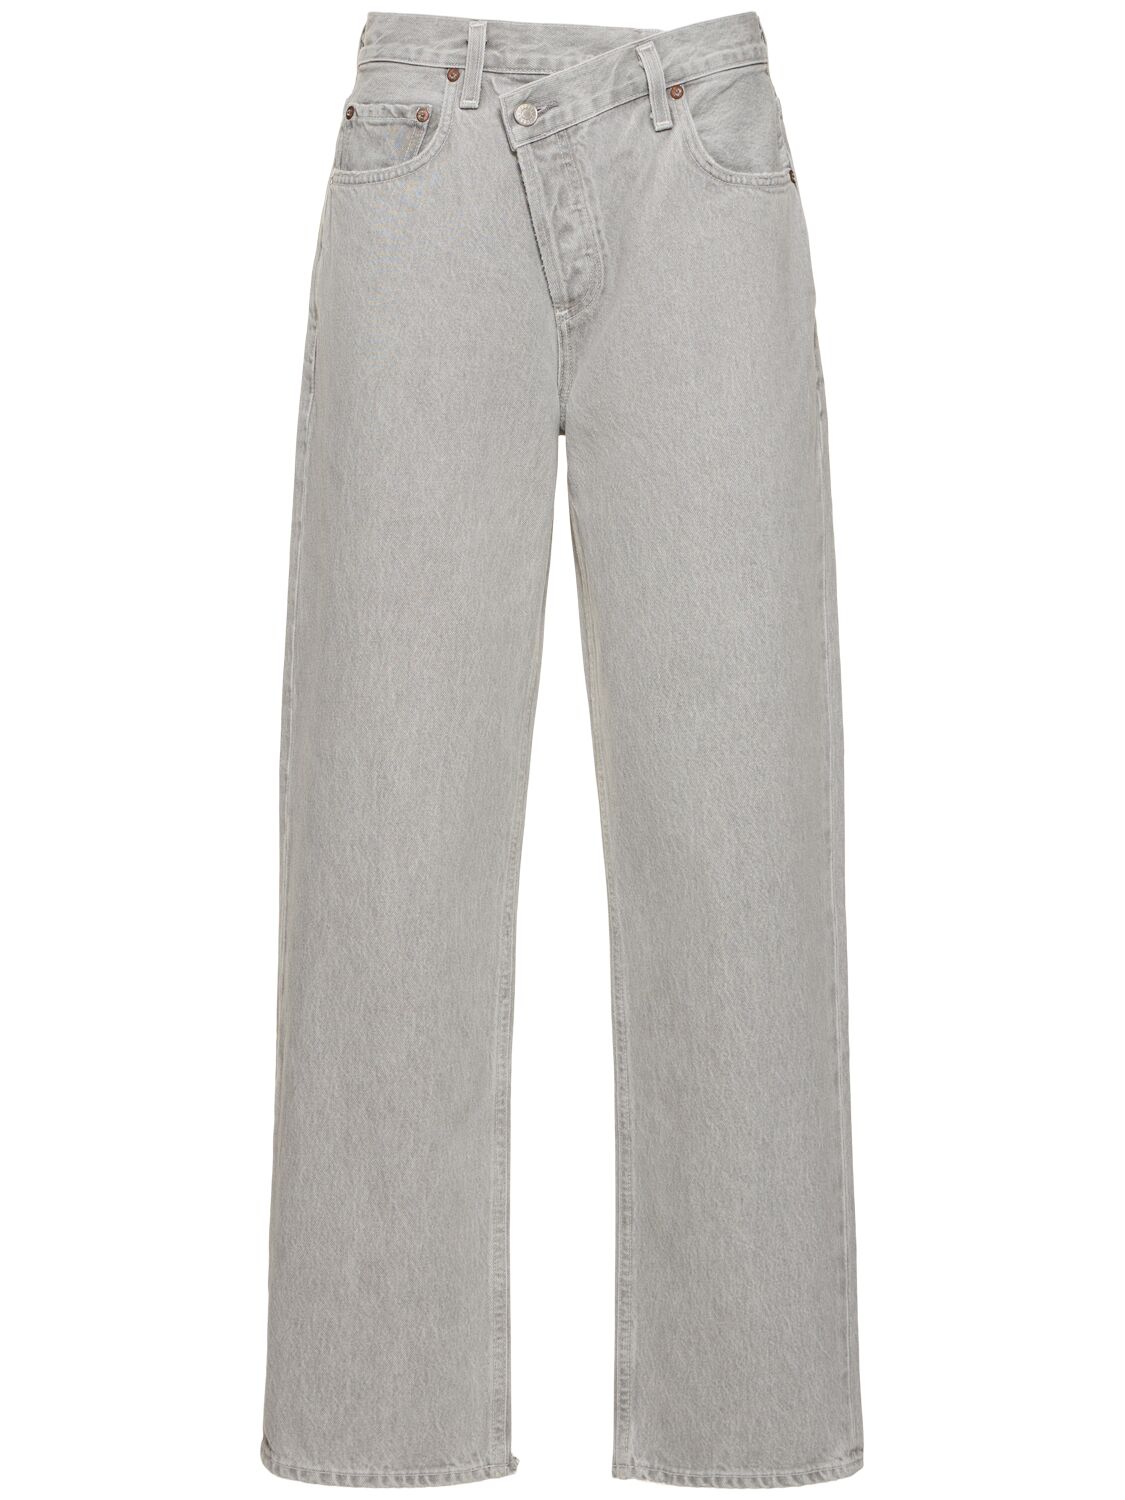 Agolde Criss Cross Wide High Rise Jeans In Gray